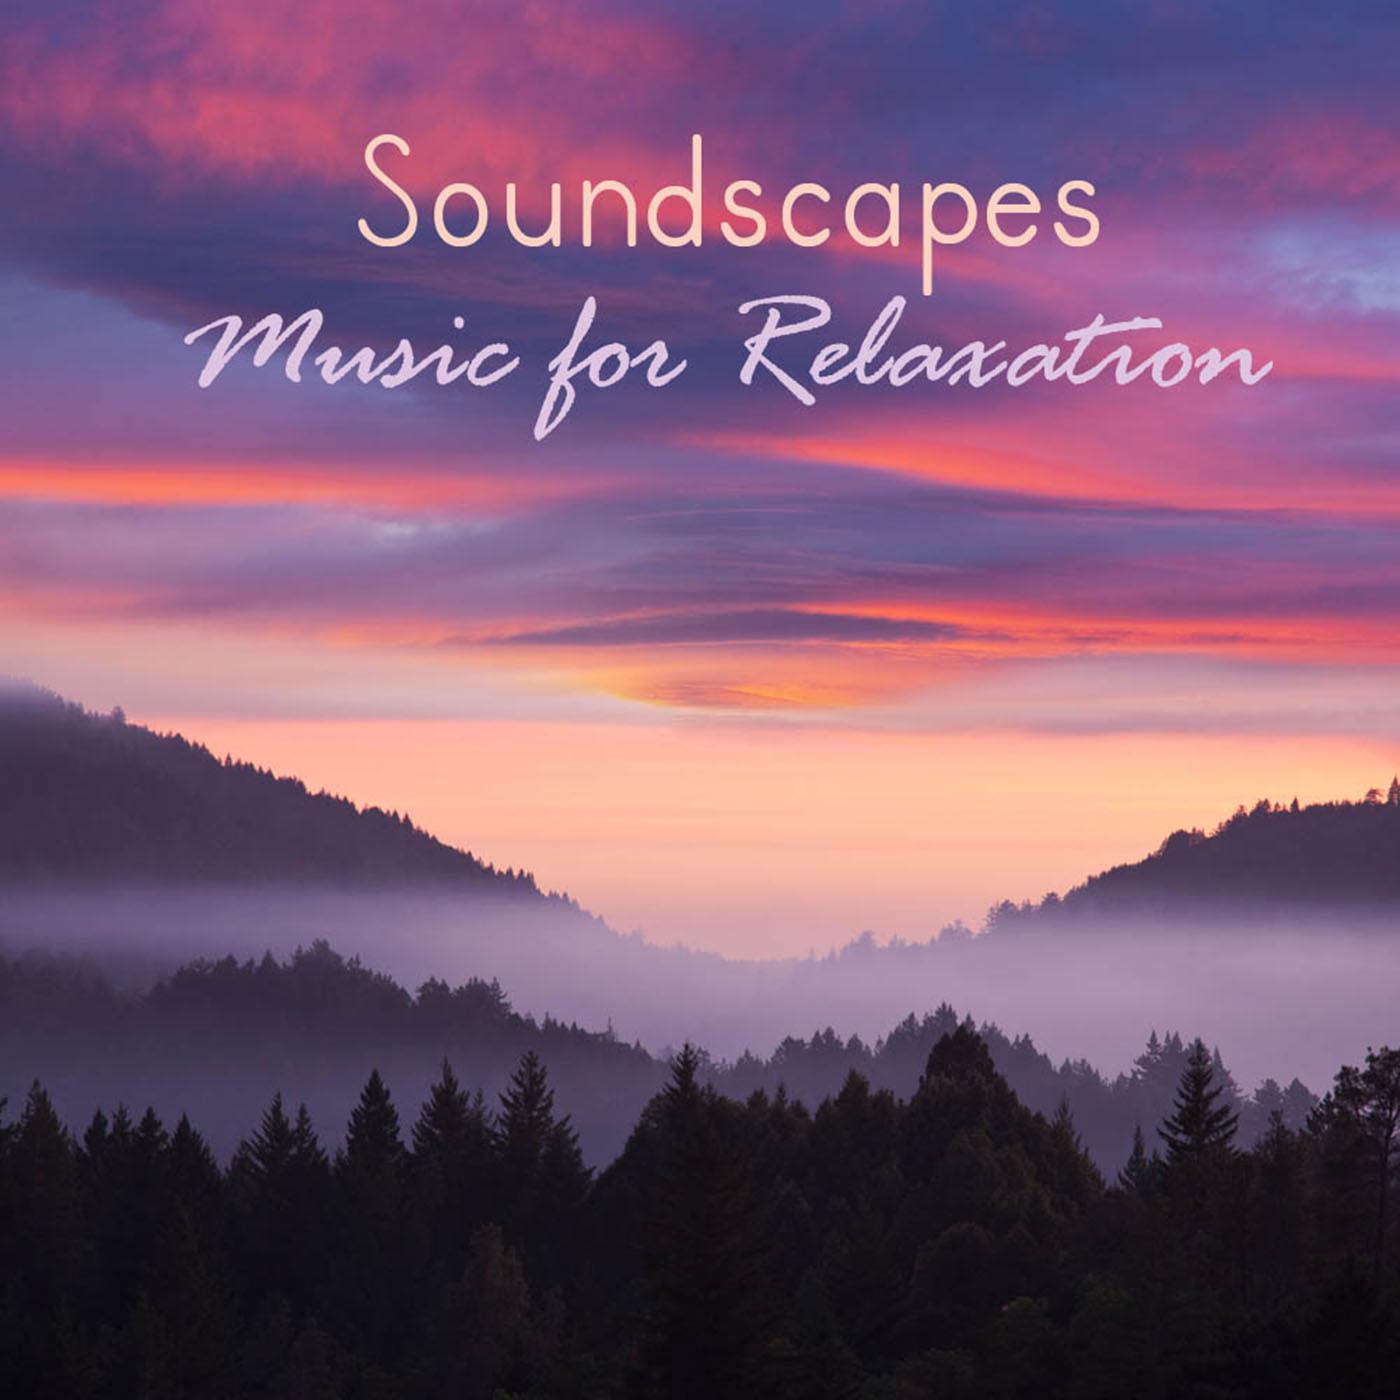 Soundscapes Music for Relaxation Soothing Relaxing Music with Nature Sounds for Relaxation Meditation, Spa, Yoga, Reiki and Massage